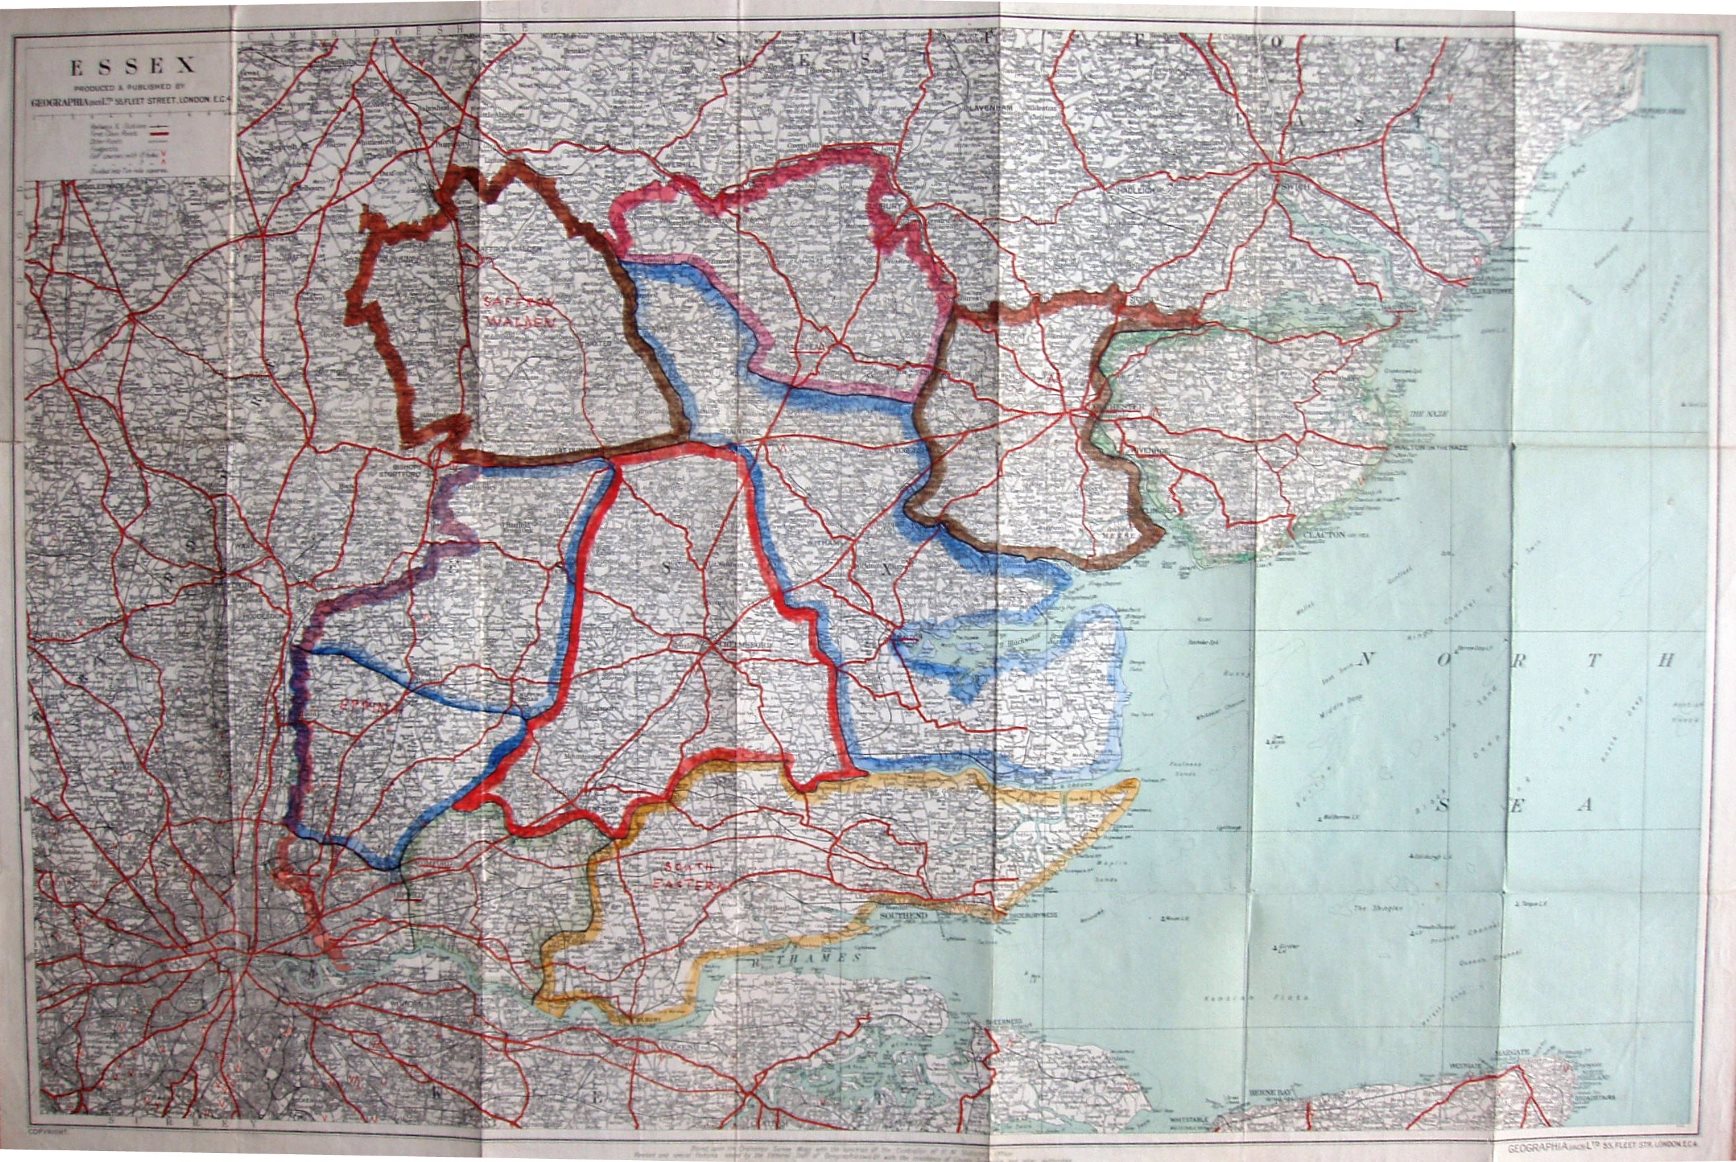 Geographia Large Scale Road Map of Essex, 1925